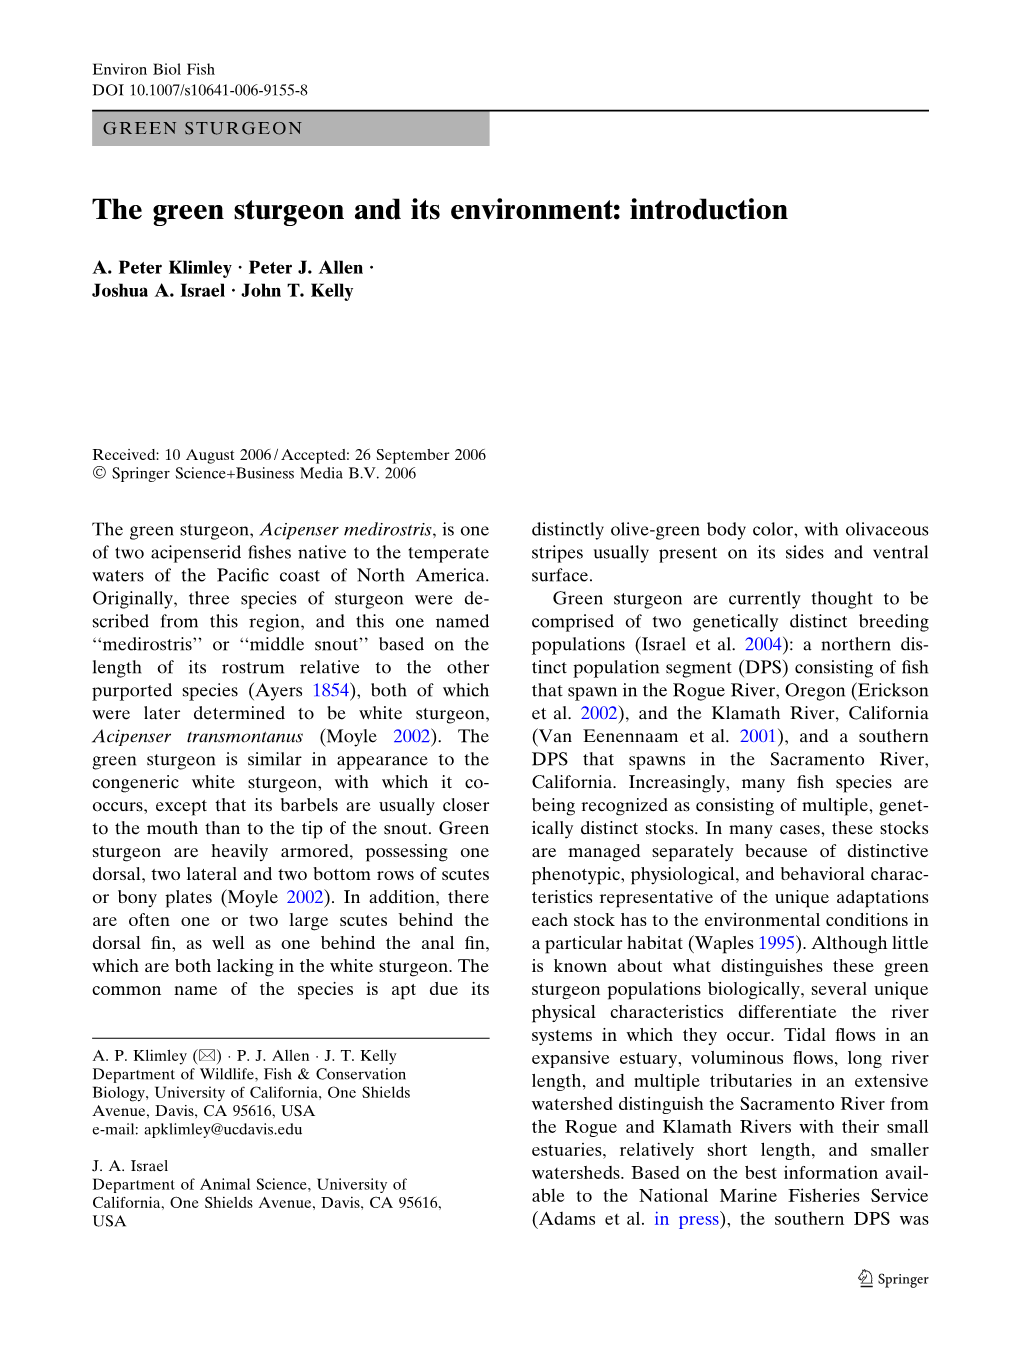 The Green Sturgeon and Its Environment: Introduction